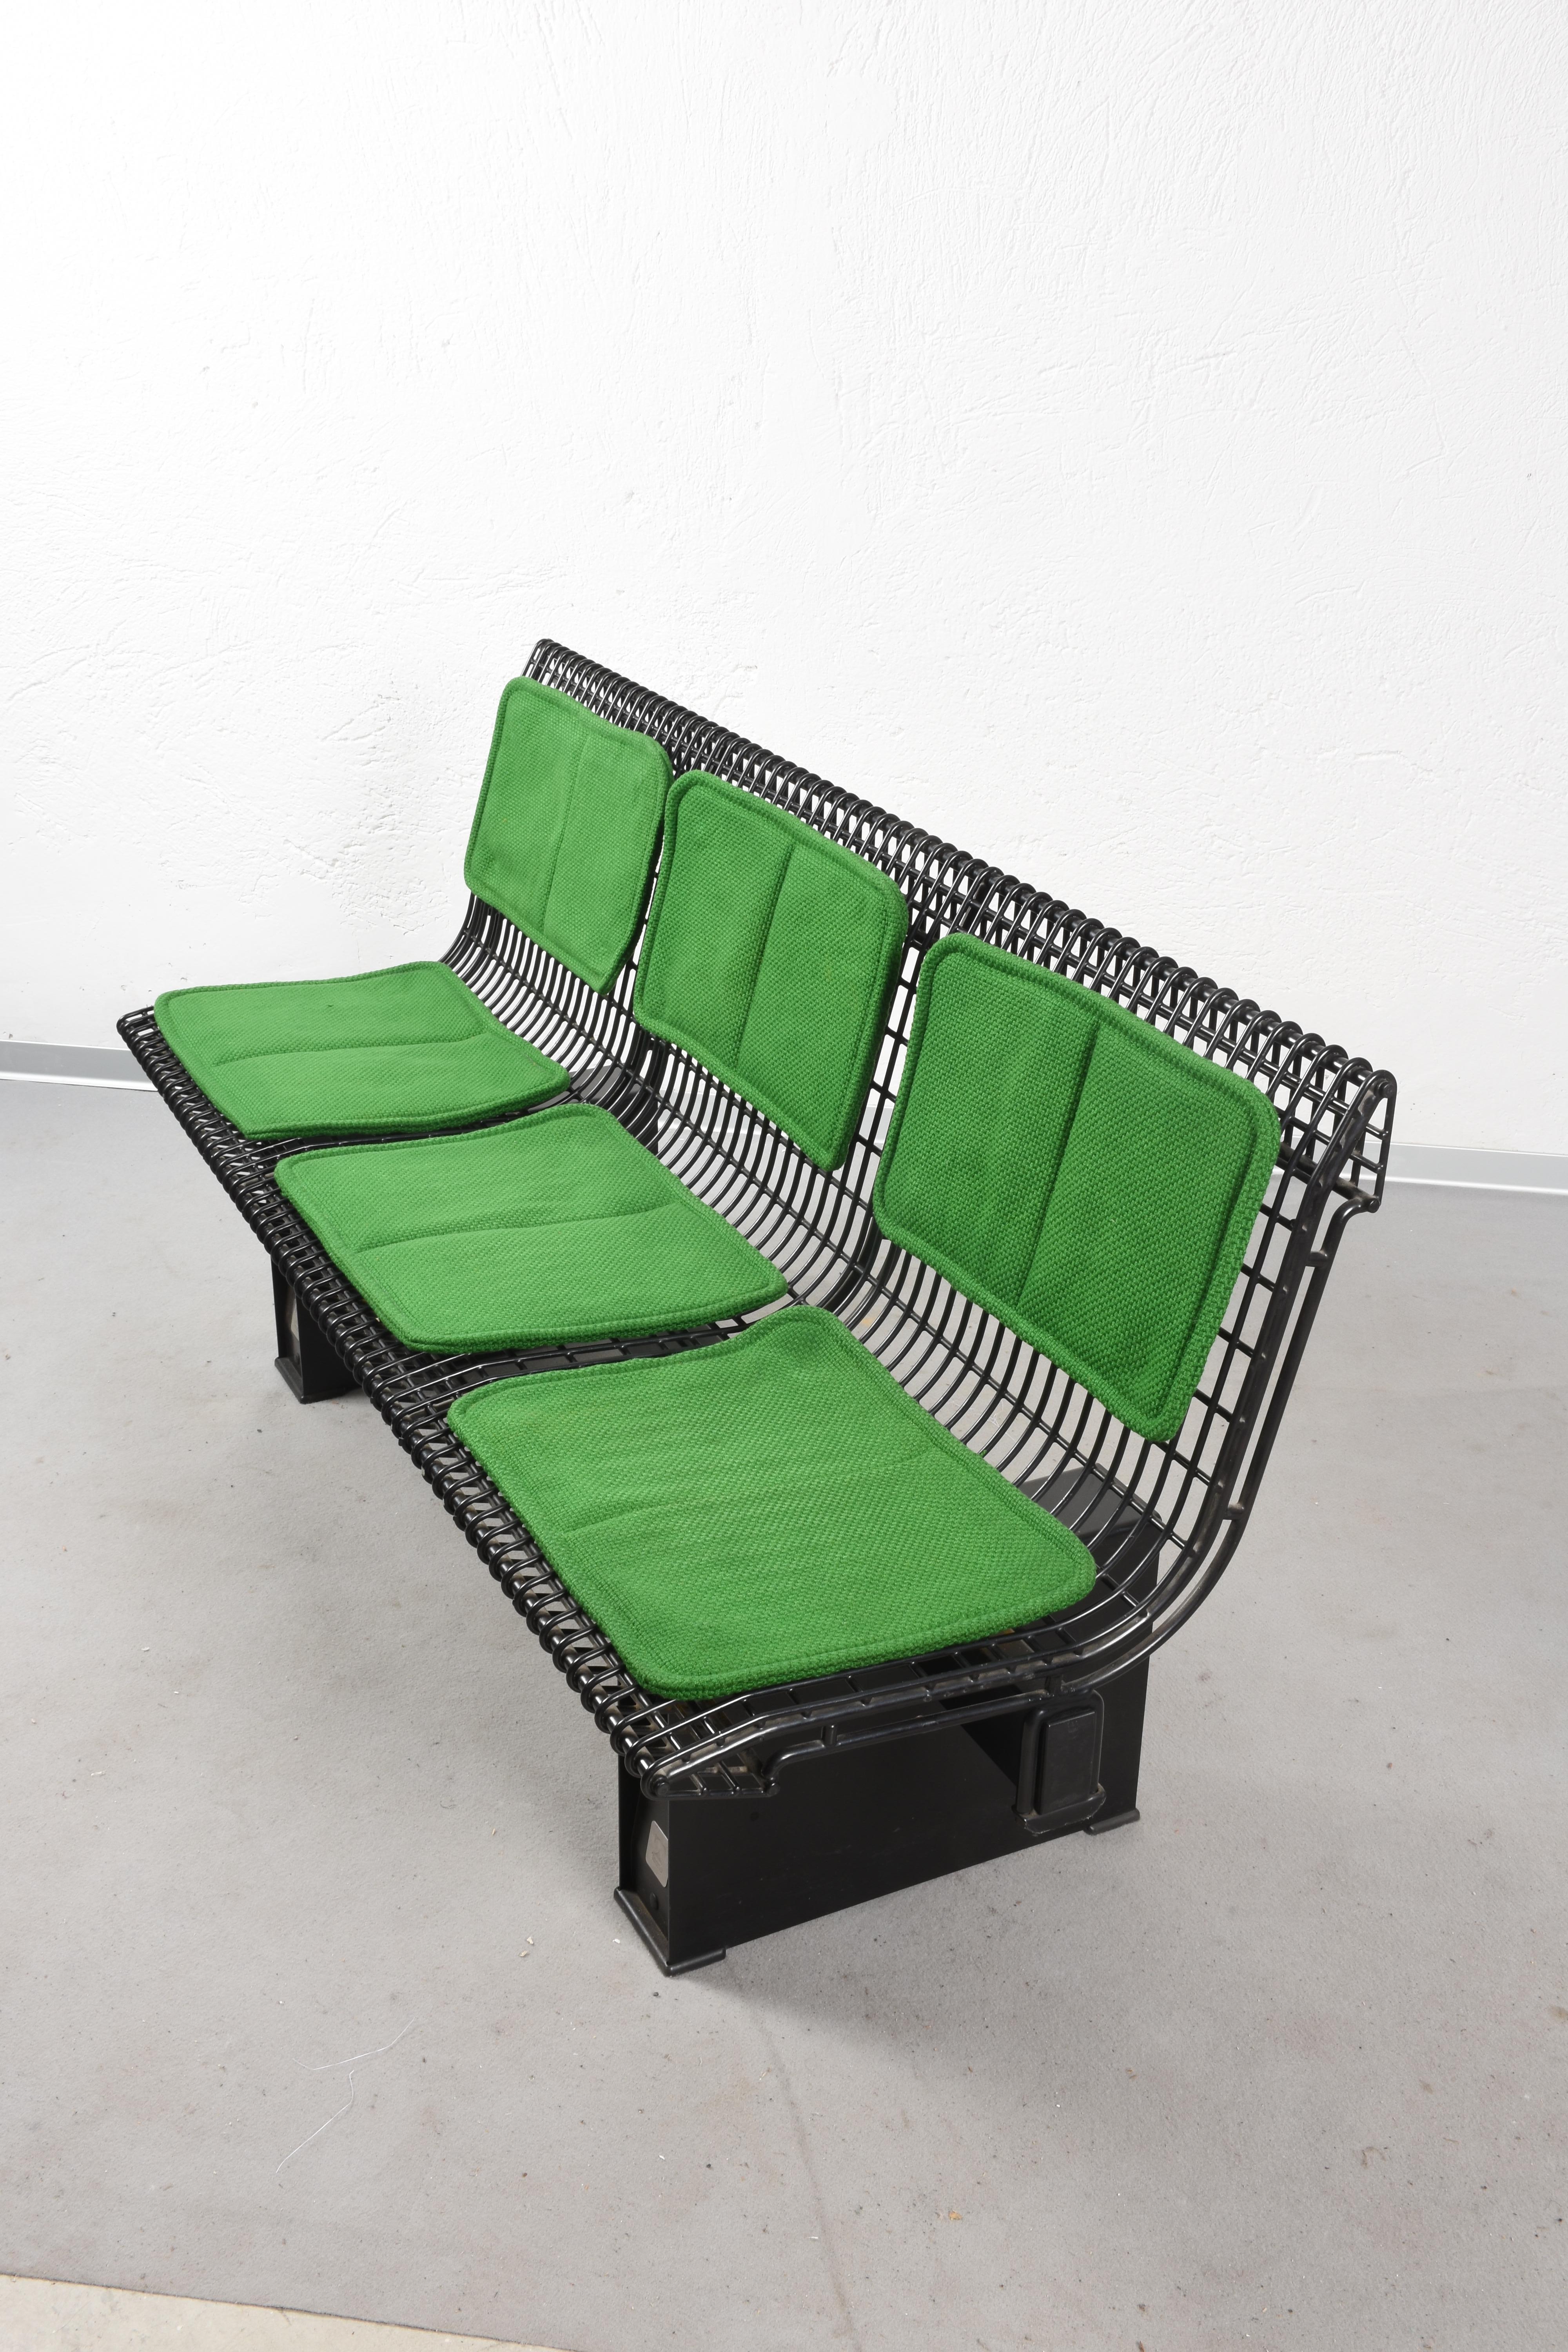 Marco Fantoni Green Fabric and Enameled Steel Italian Bench for Tecno, 1982 For Sale 2